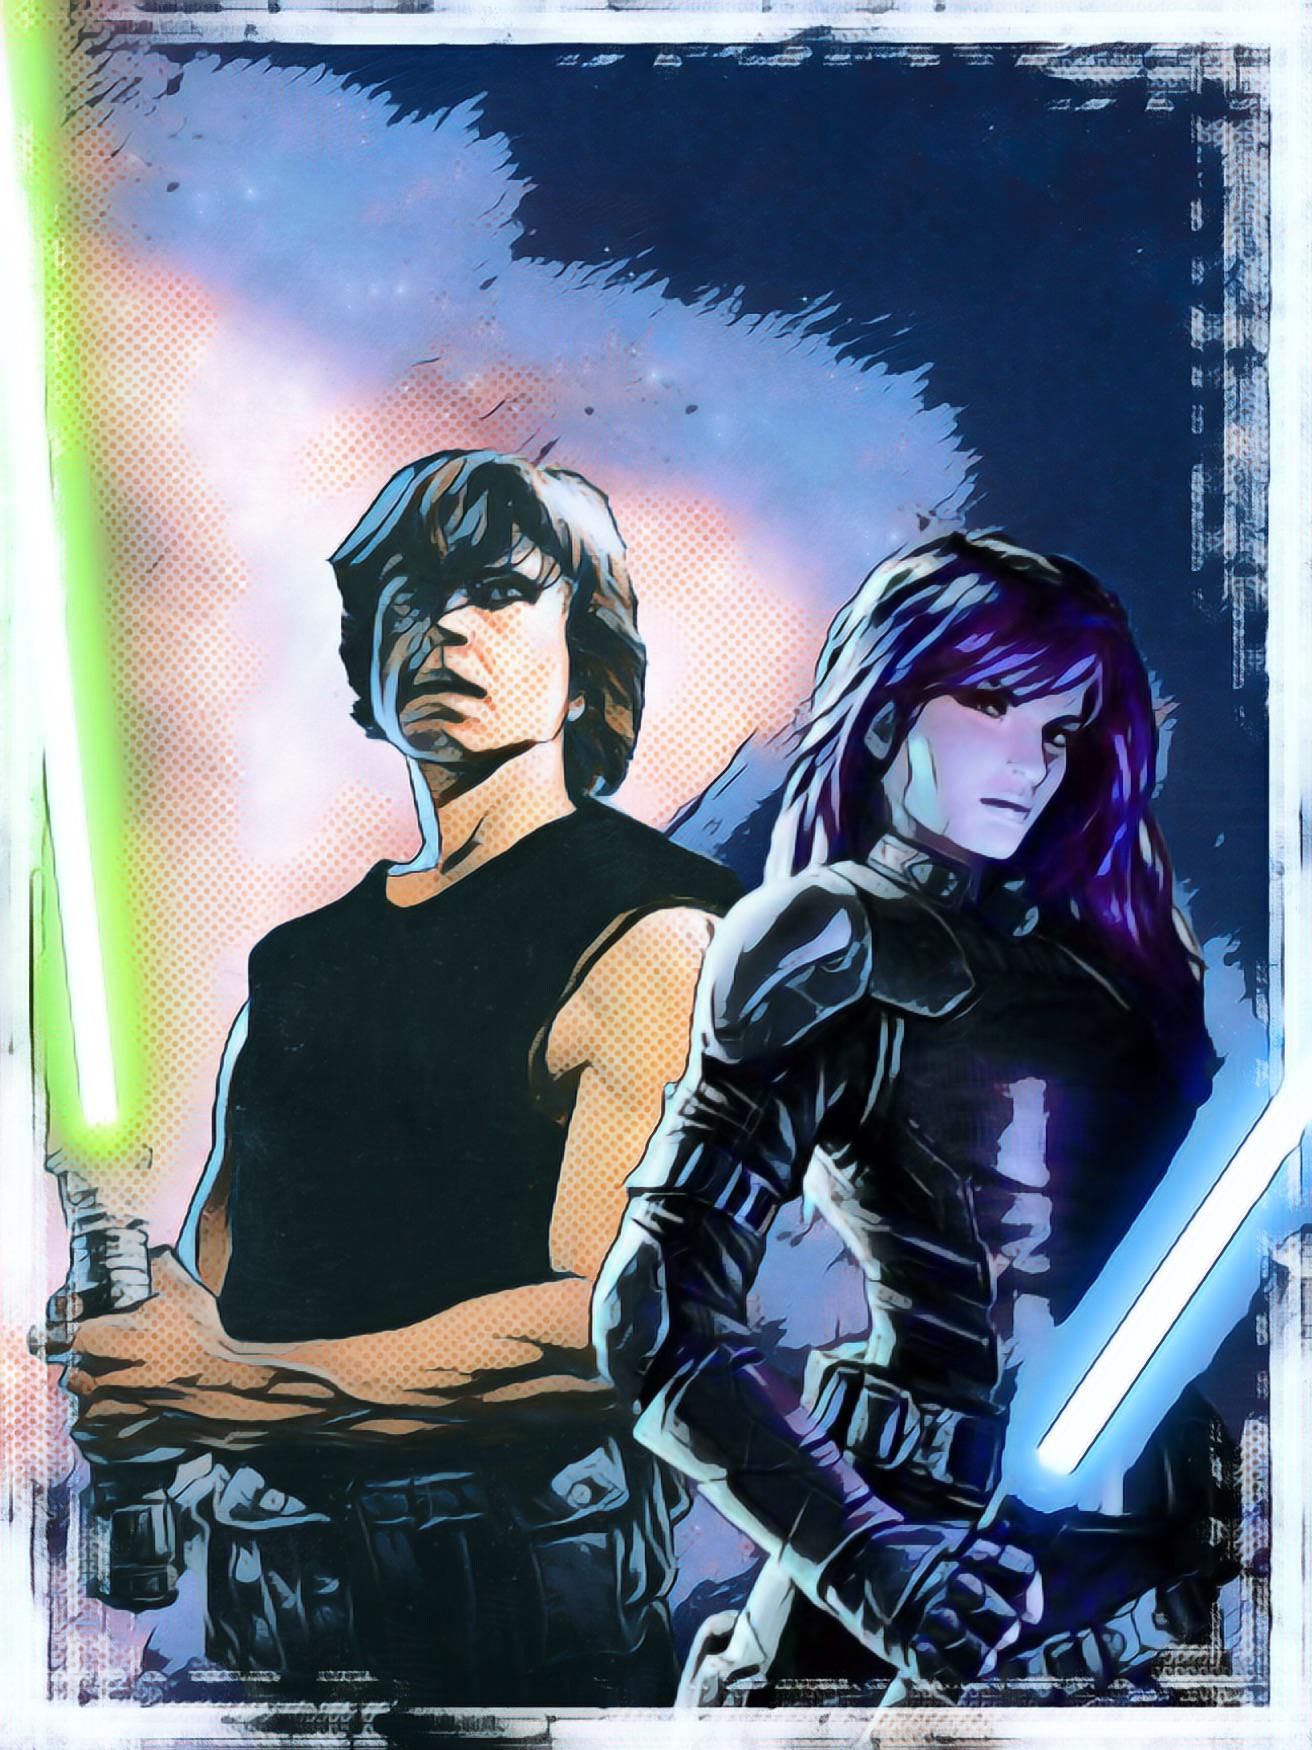 I combined two classic image of Luke Skywalker and Mara Jade and changed the lightsabers to match.: StarWarsEU